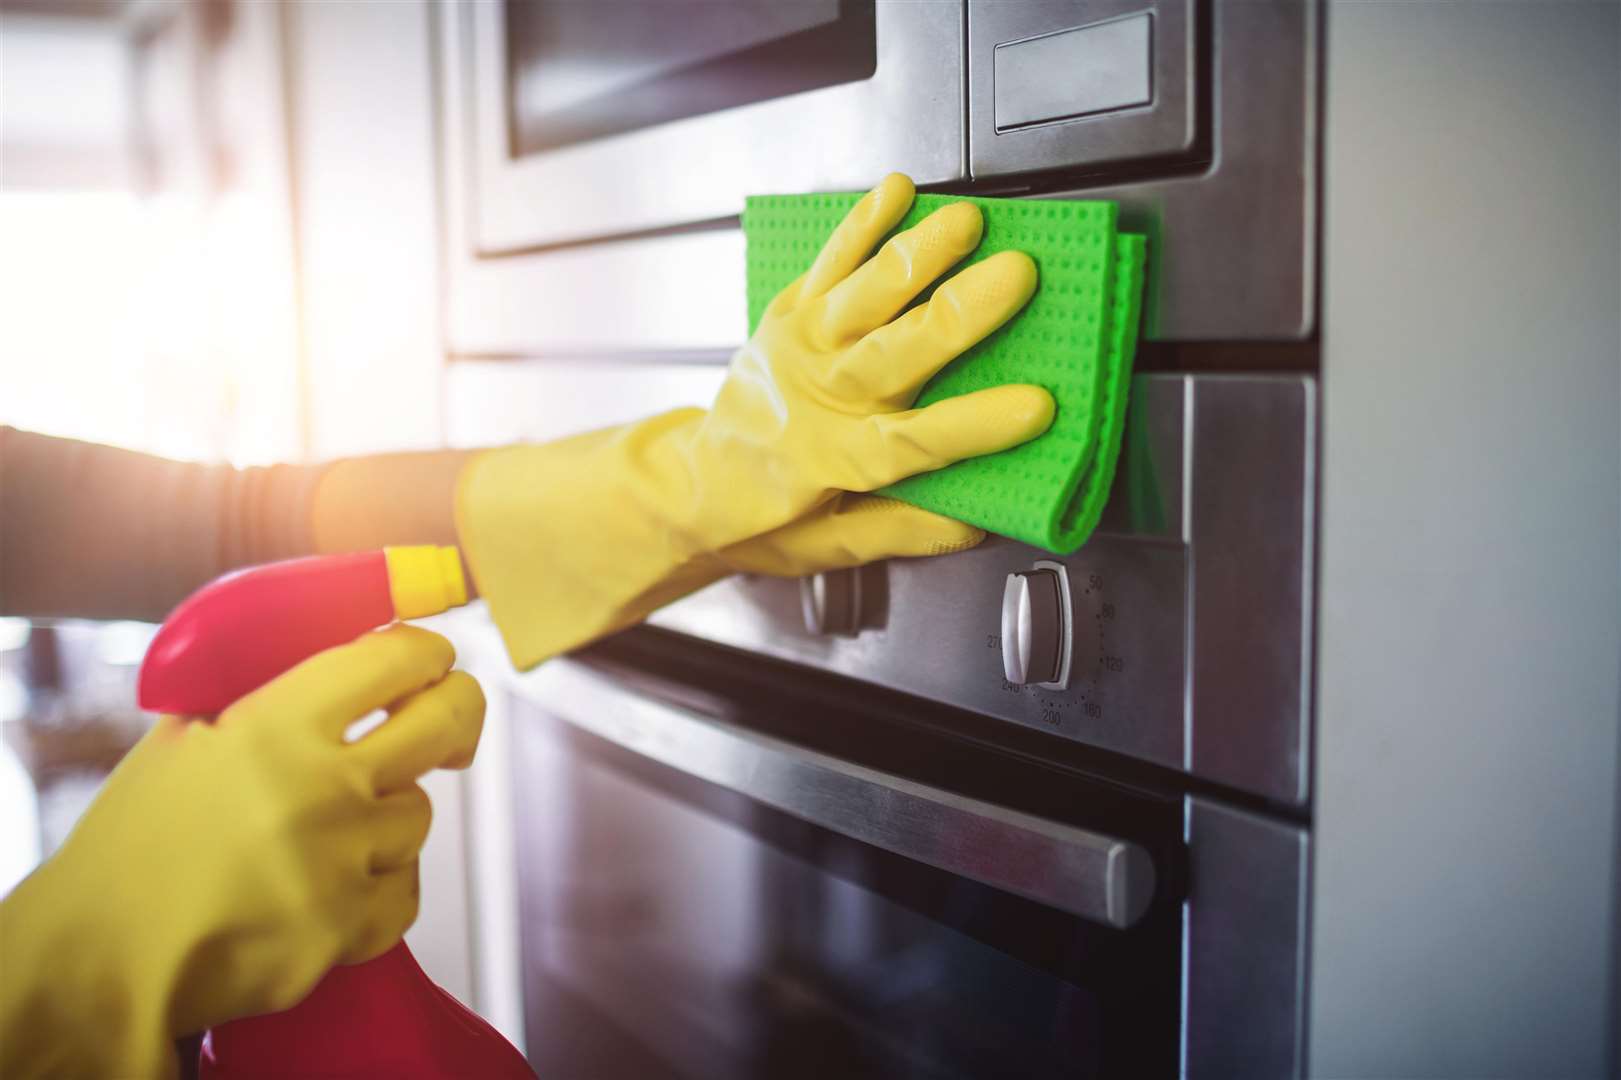 Do you want your oven to be sparkling clean?